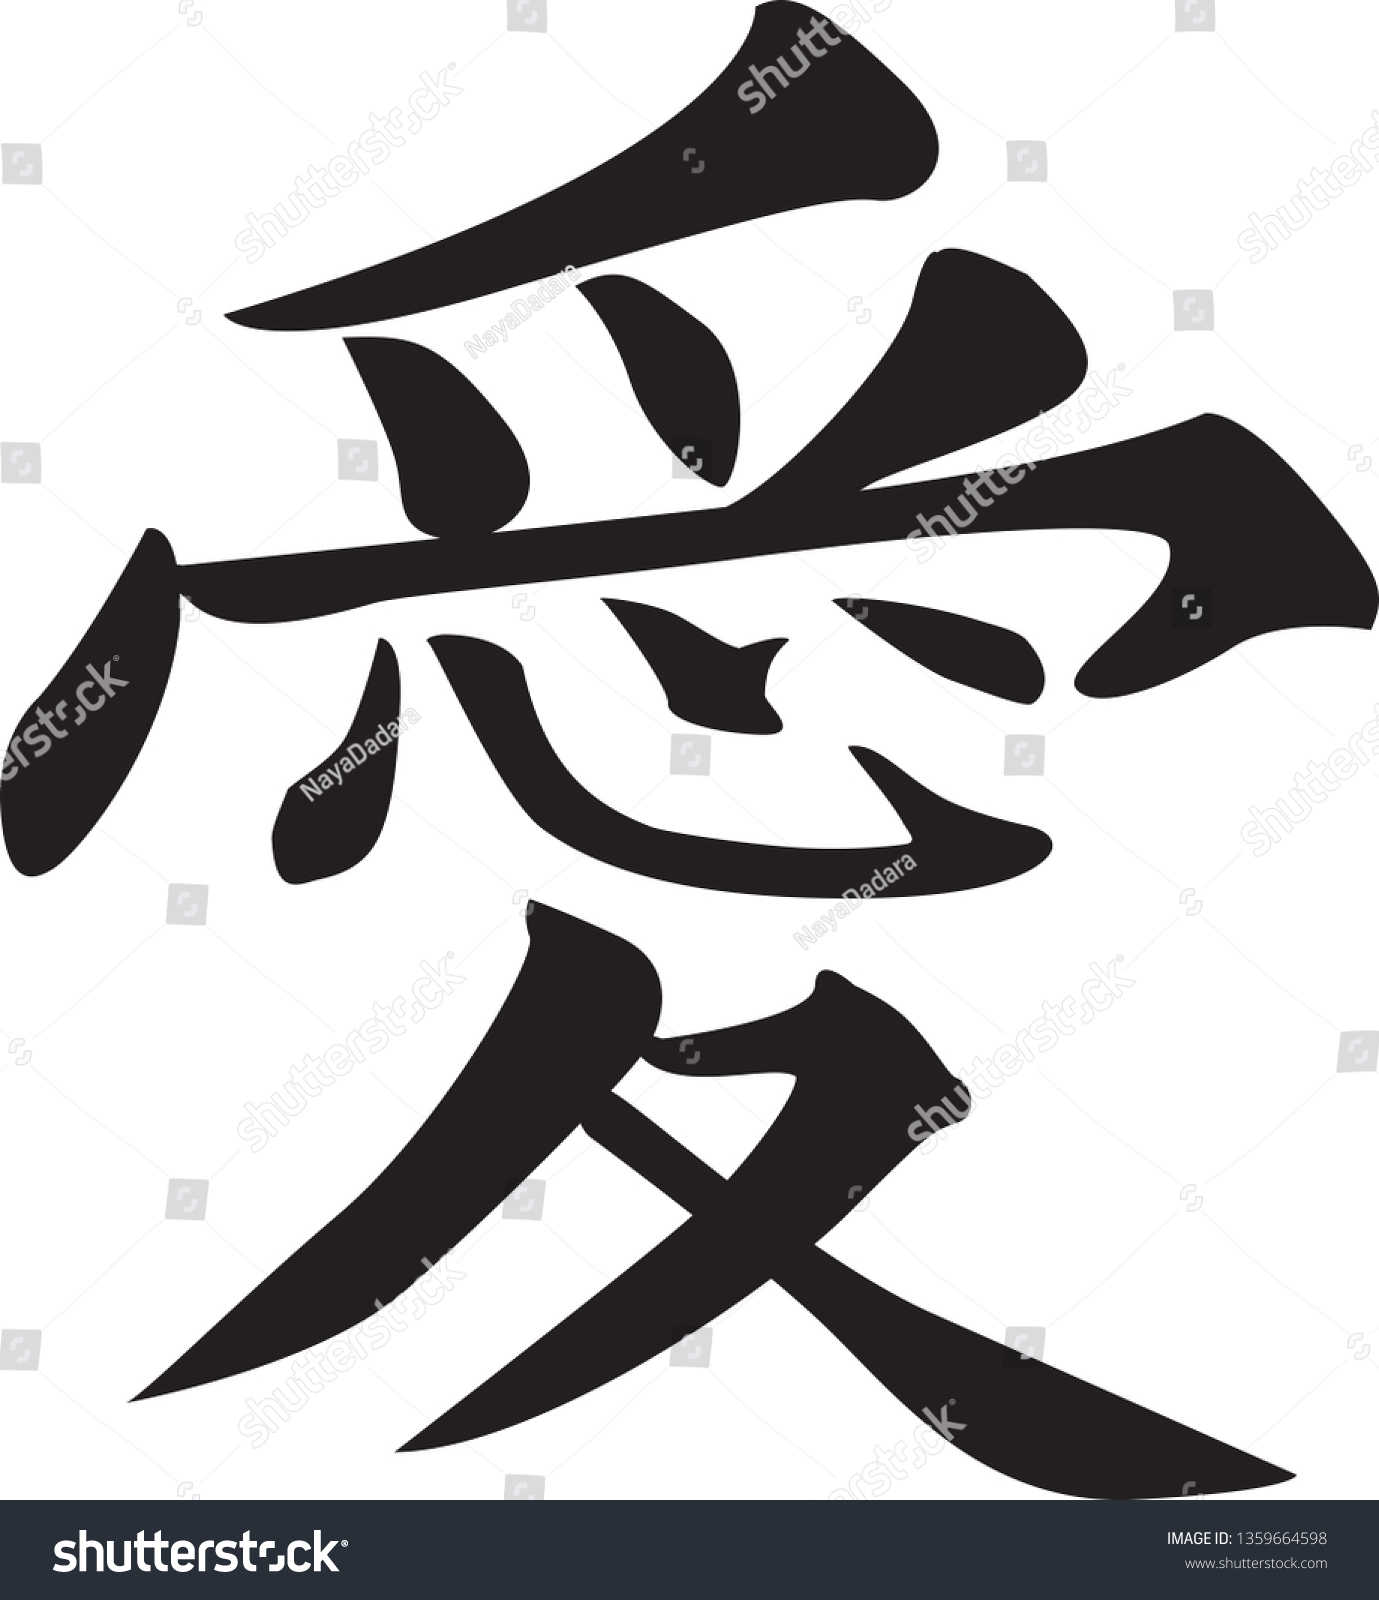 814 Chinese symbol affection Images, Stock Photos & Vectors | Shutterstock